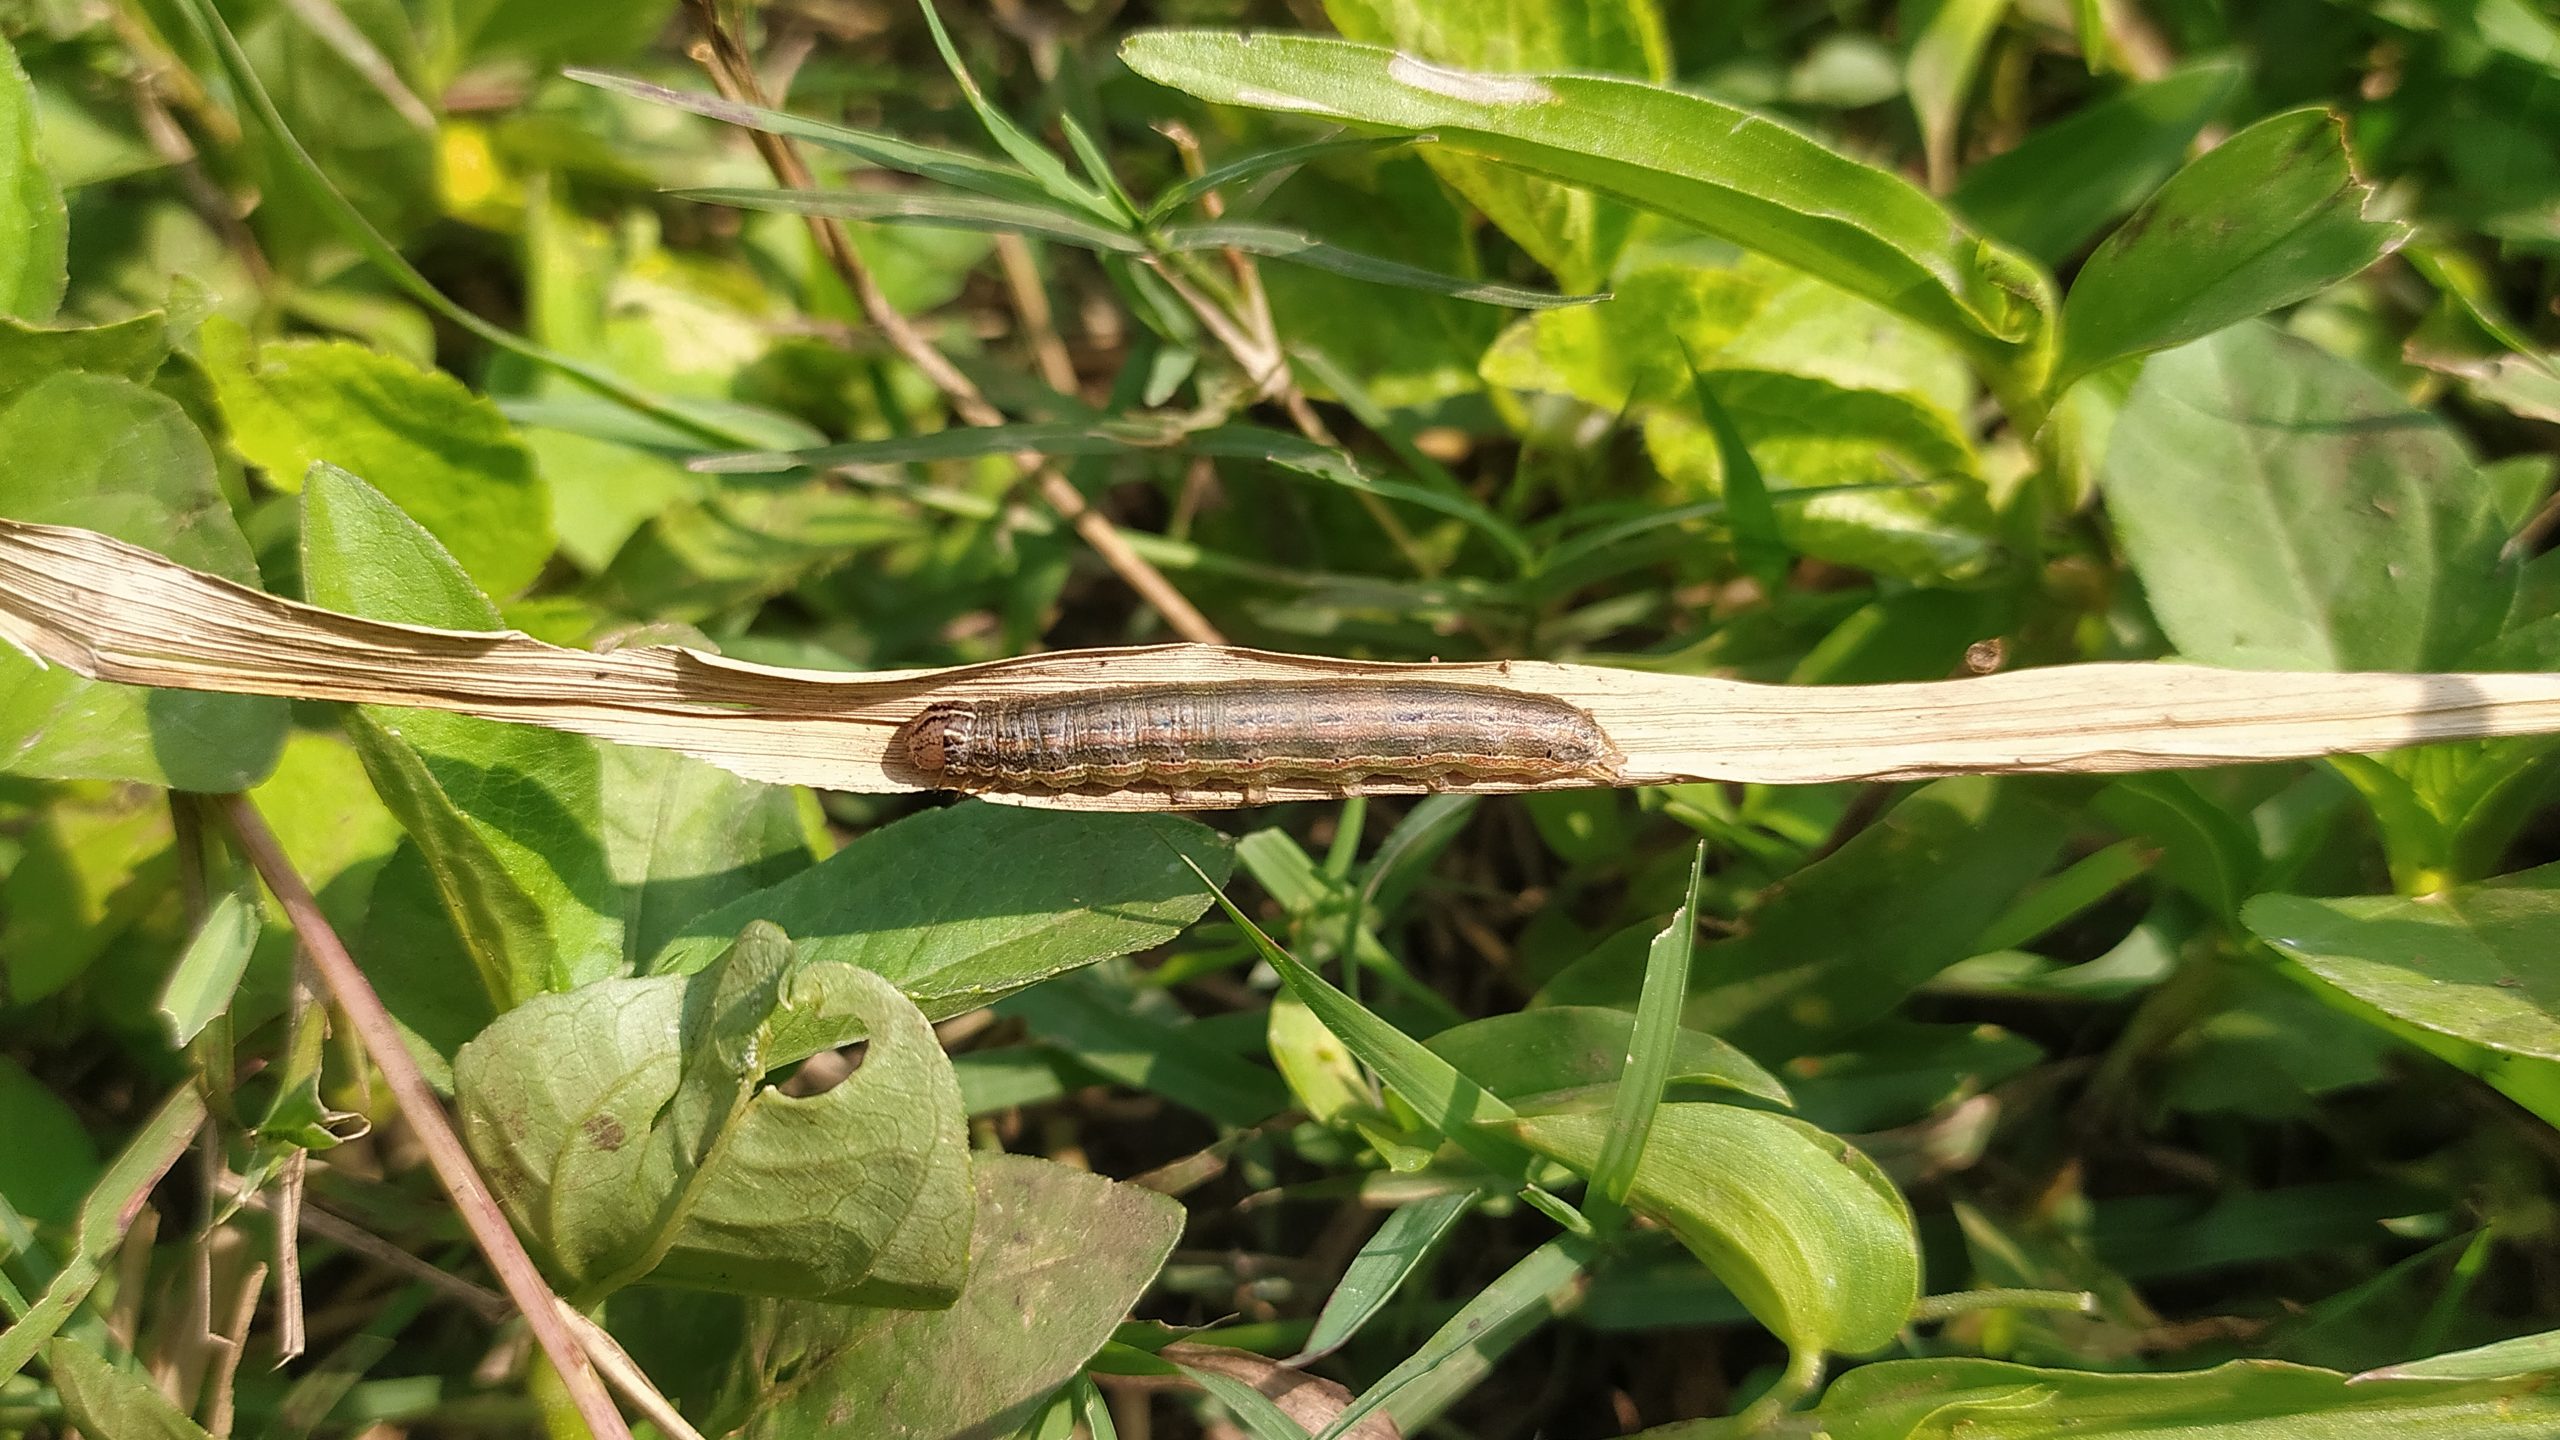 A caterpiller on a dry leaf